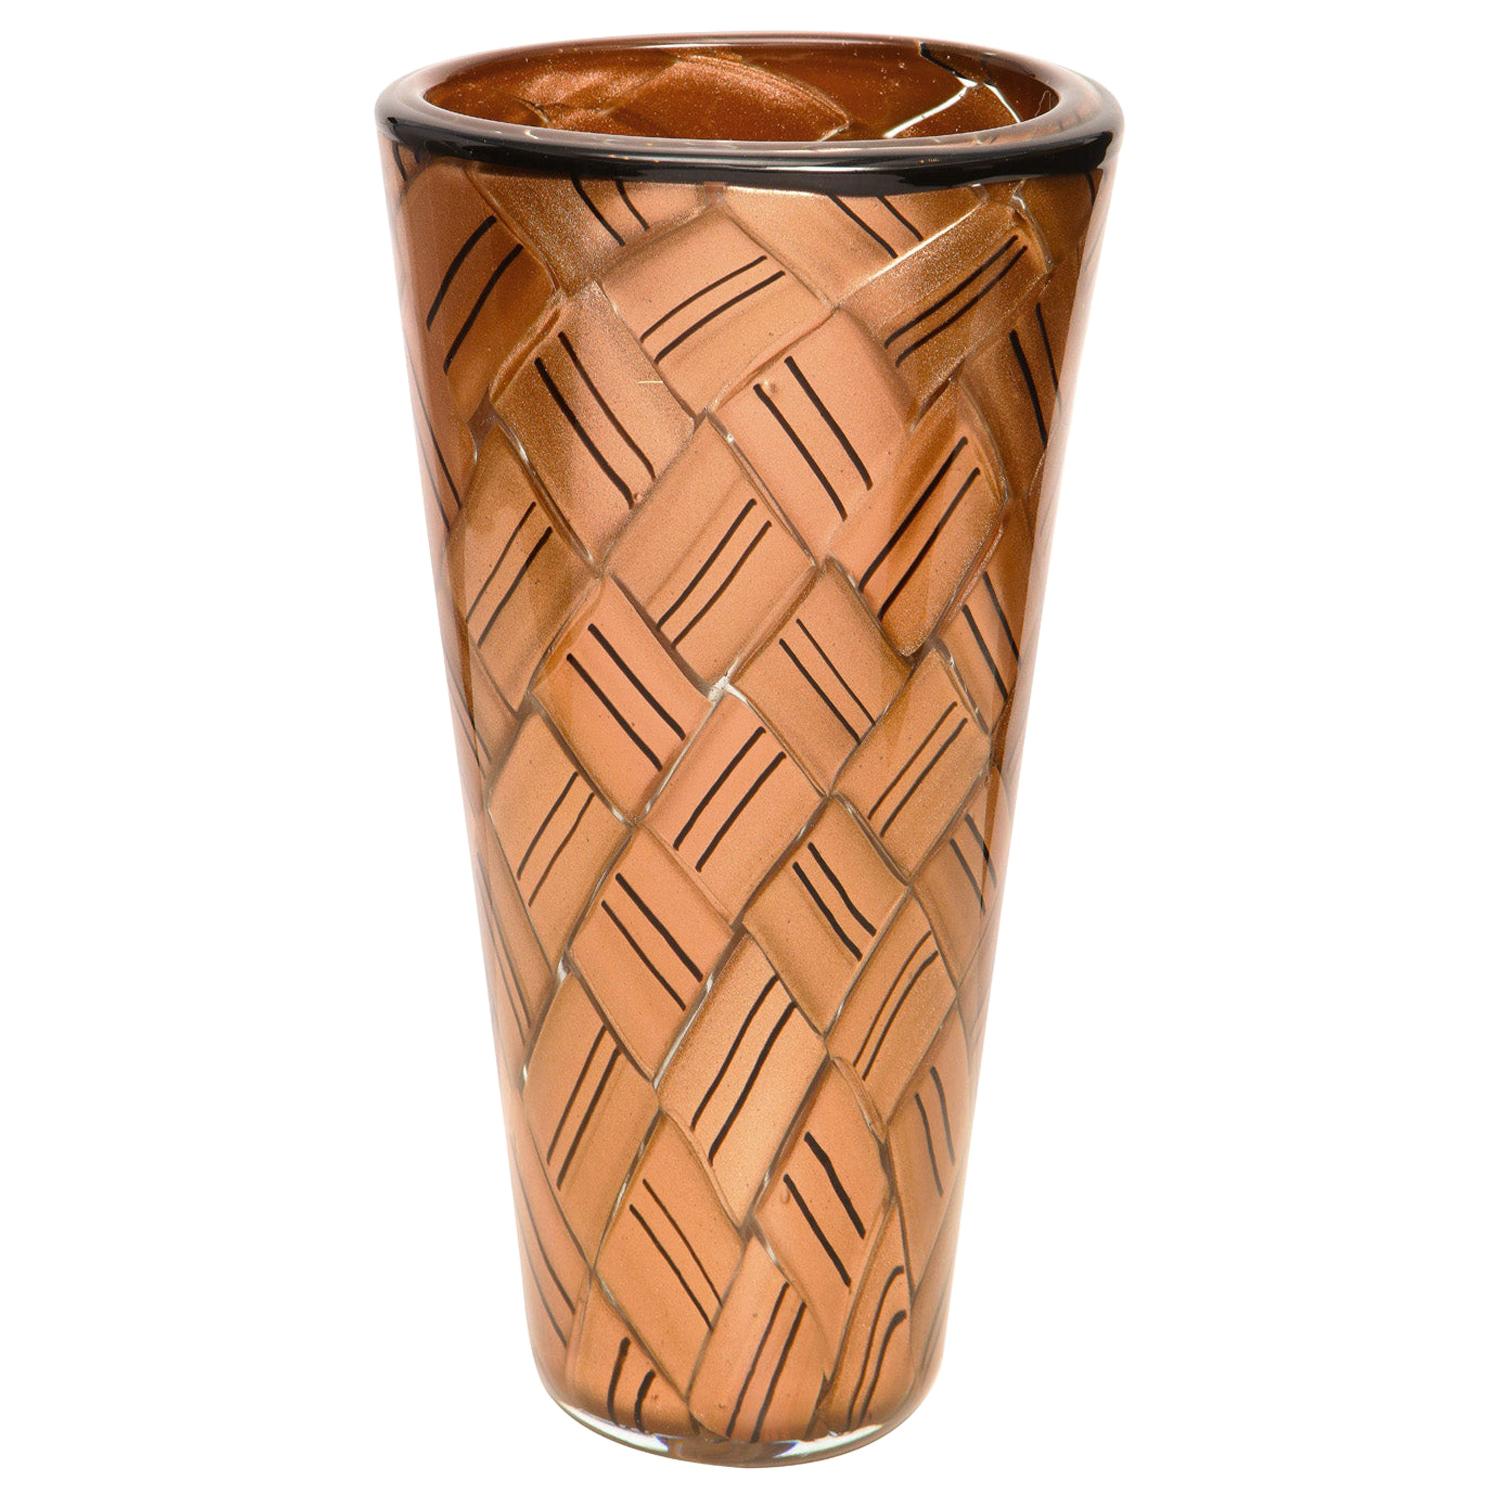 Vittorio Ferro Vase with "Alterni" Pattern 2002 (Signed and Dated)